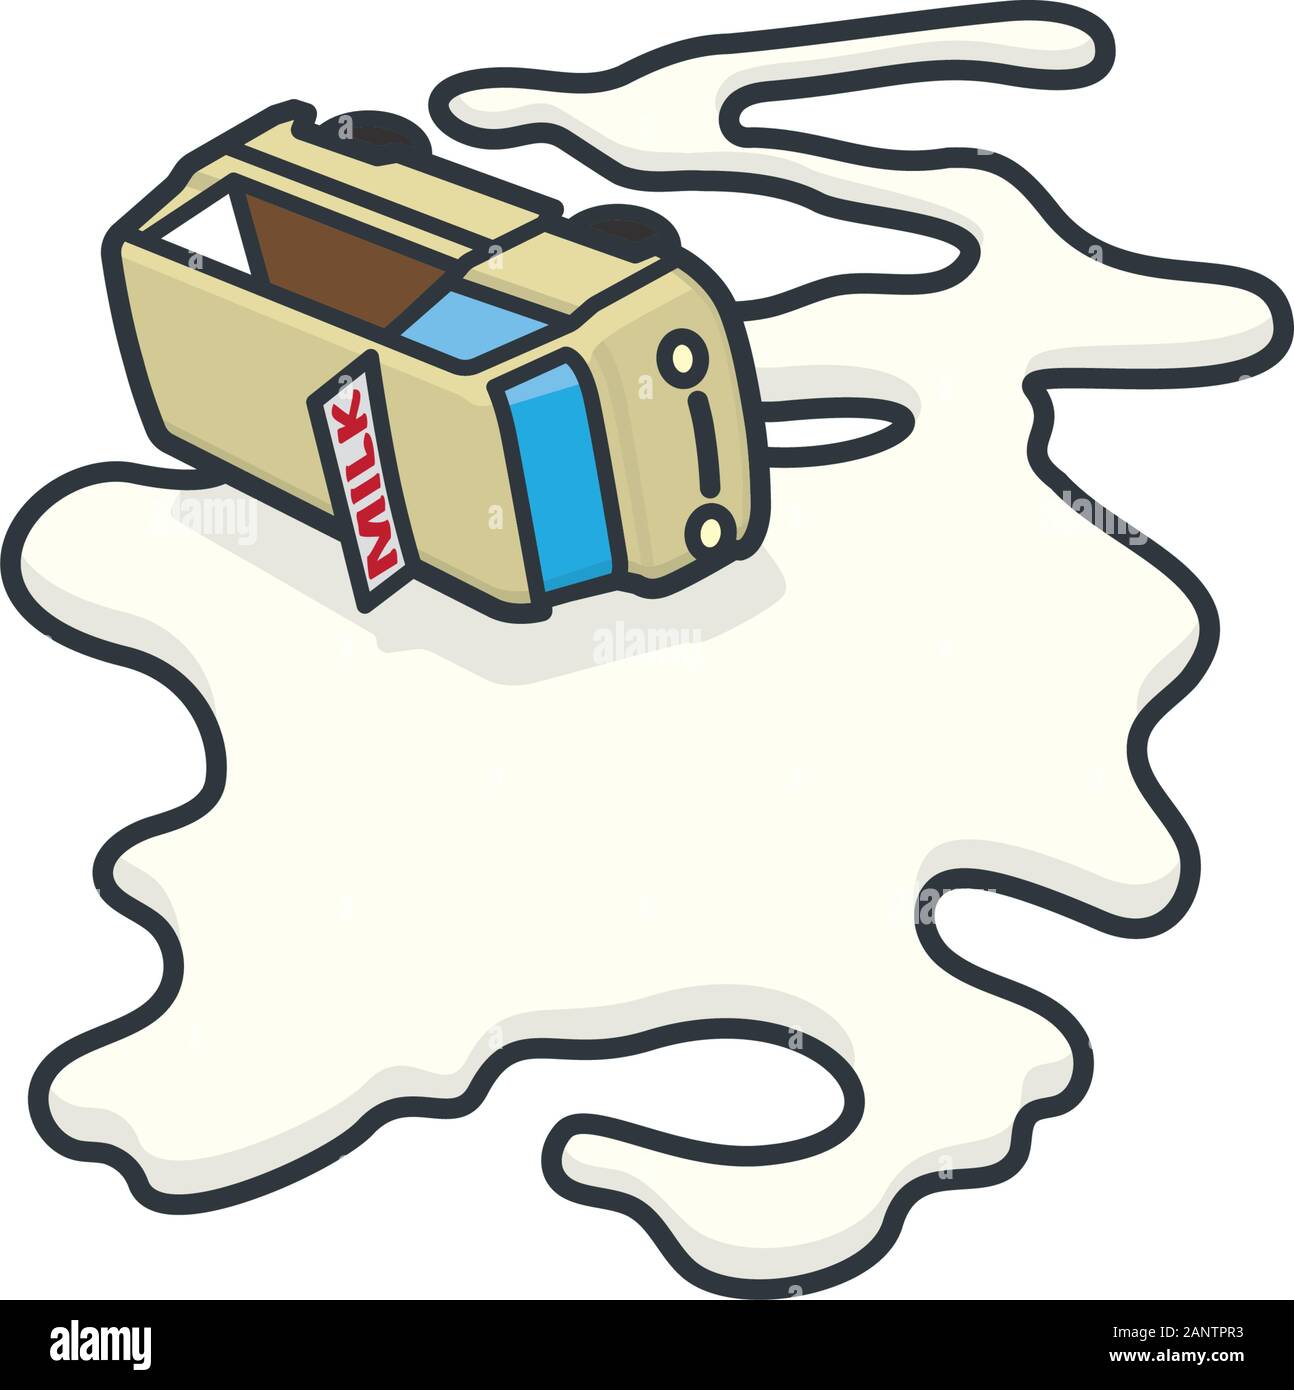 Milk delivery van accident vector illustration for #DontCryOverSpilledMilkDay on February 11. Isolated mishap concept. Stock Vector